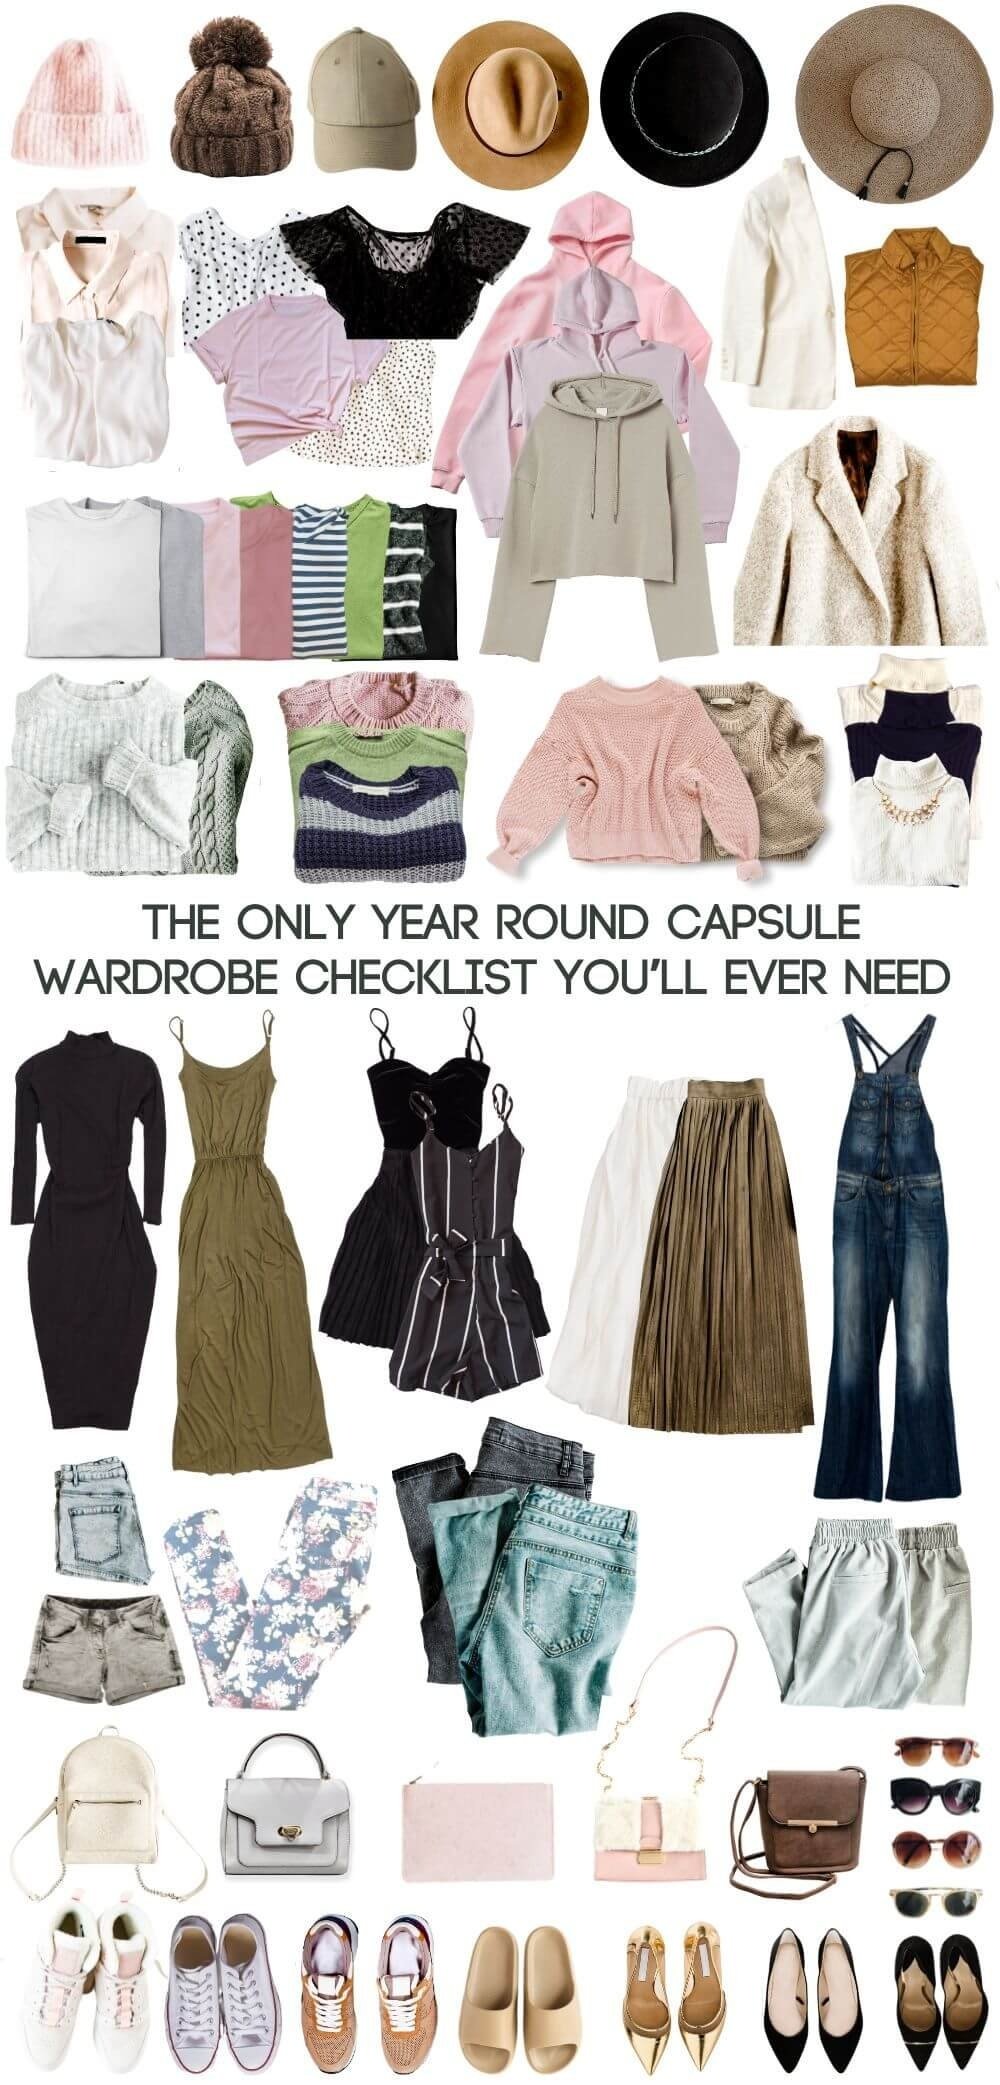 Rock style - style guide and capsule wardrobe for the ROCK style